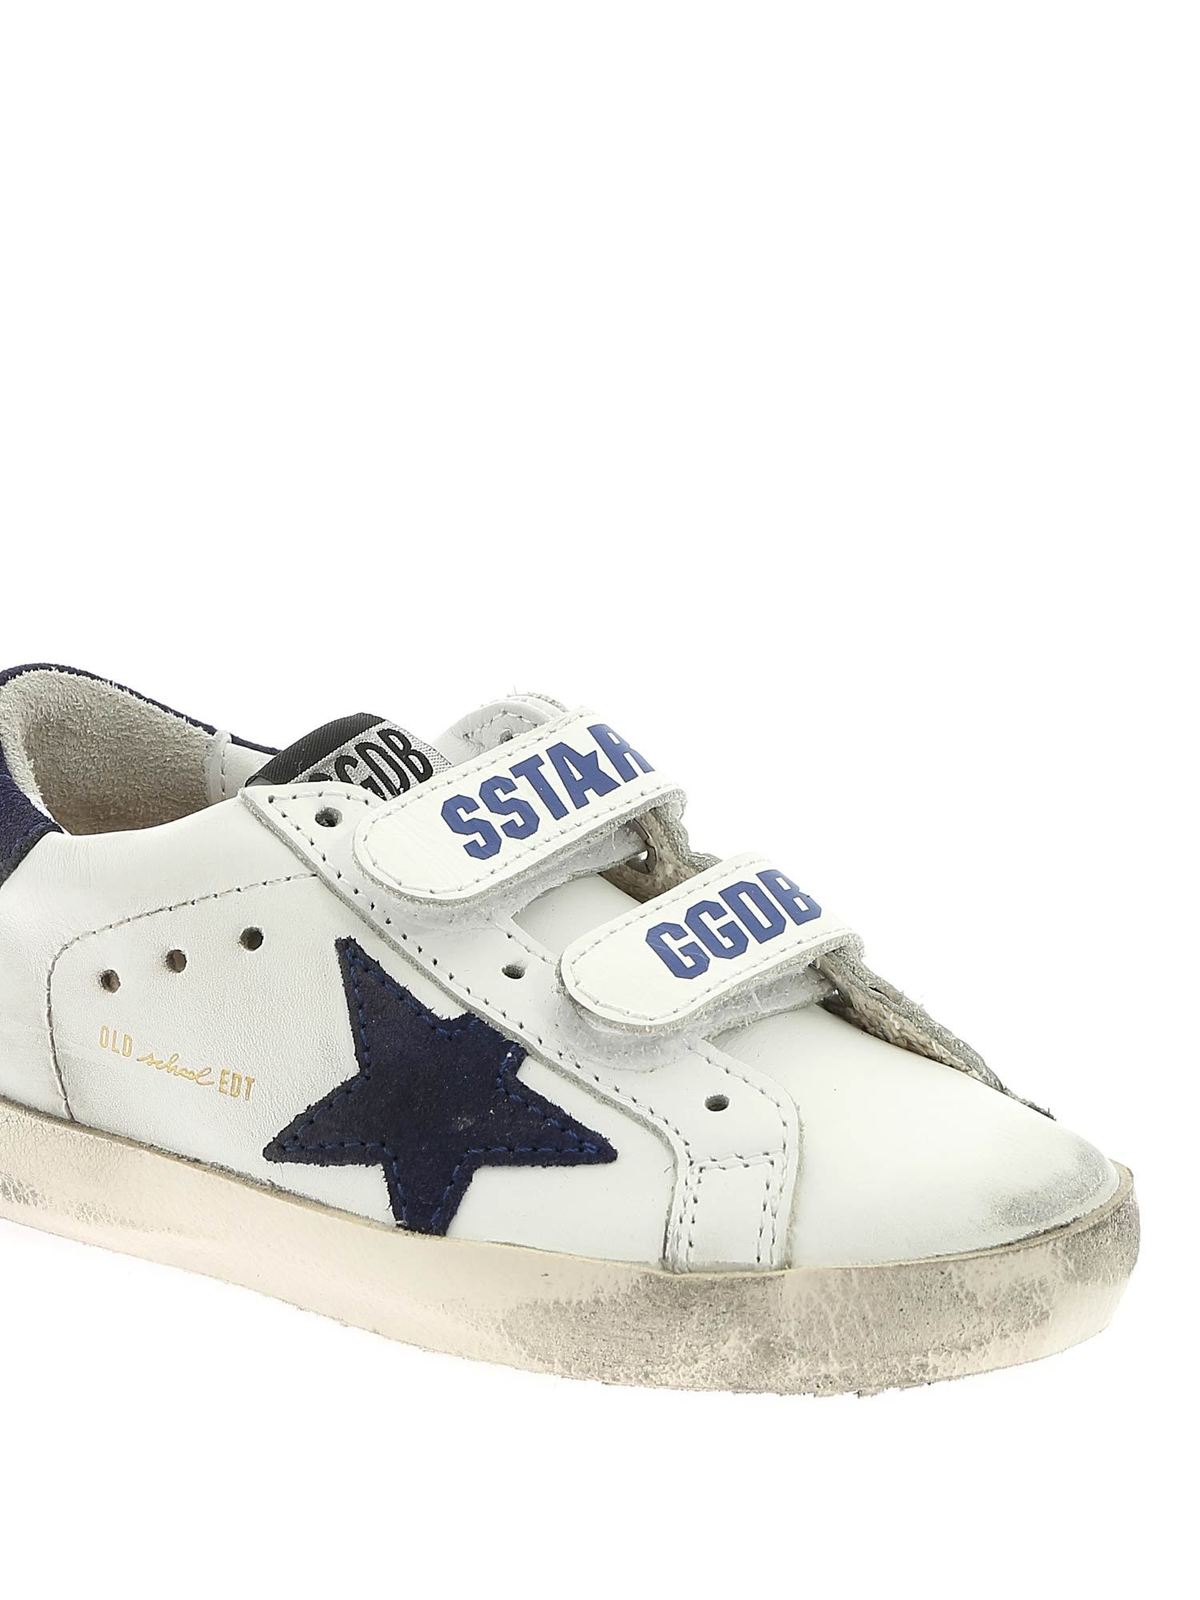 Trainers Golden - Old School sneakers in white and blue -